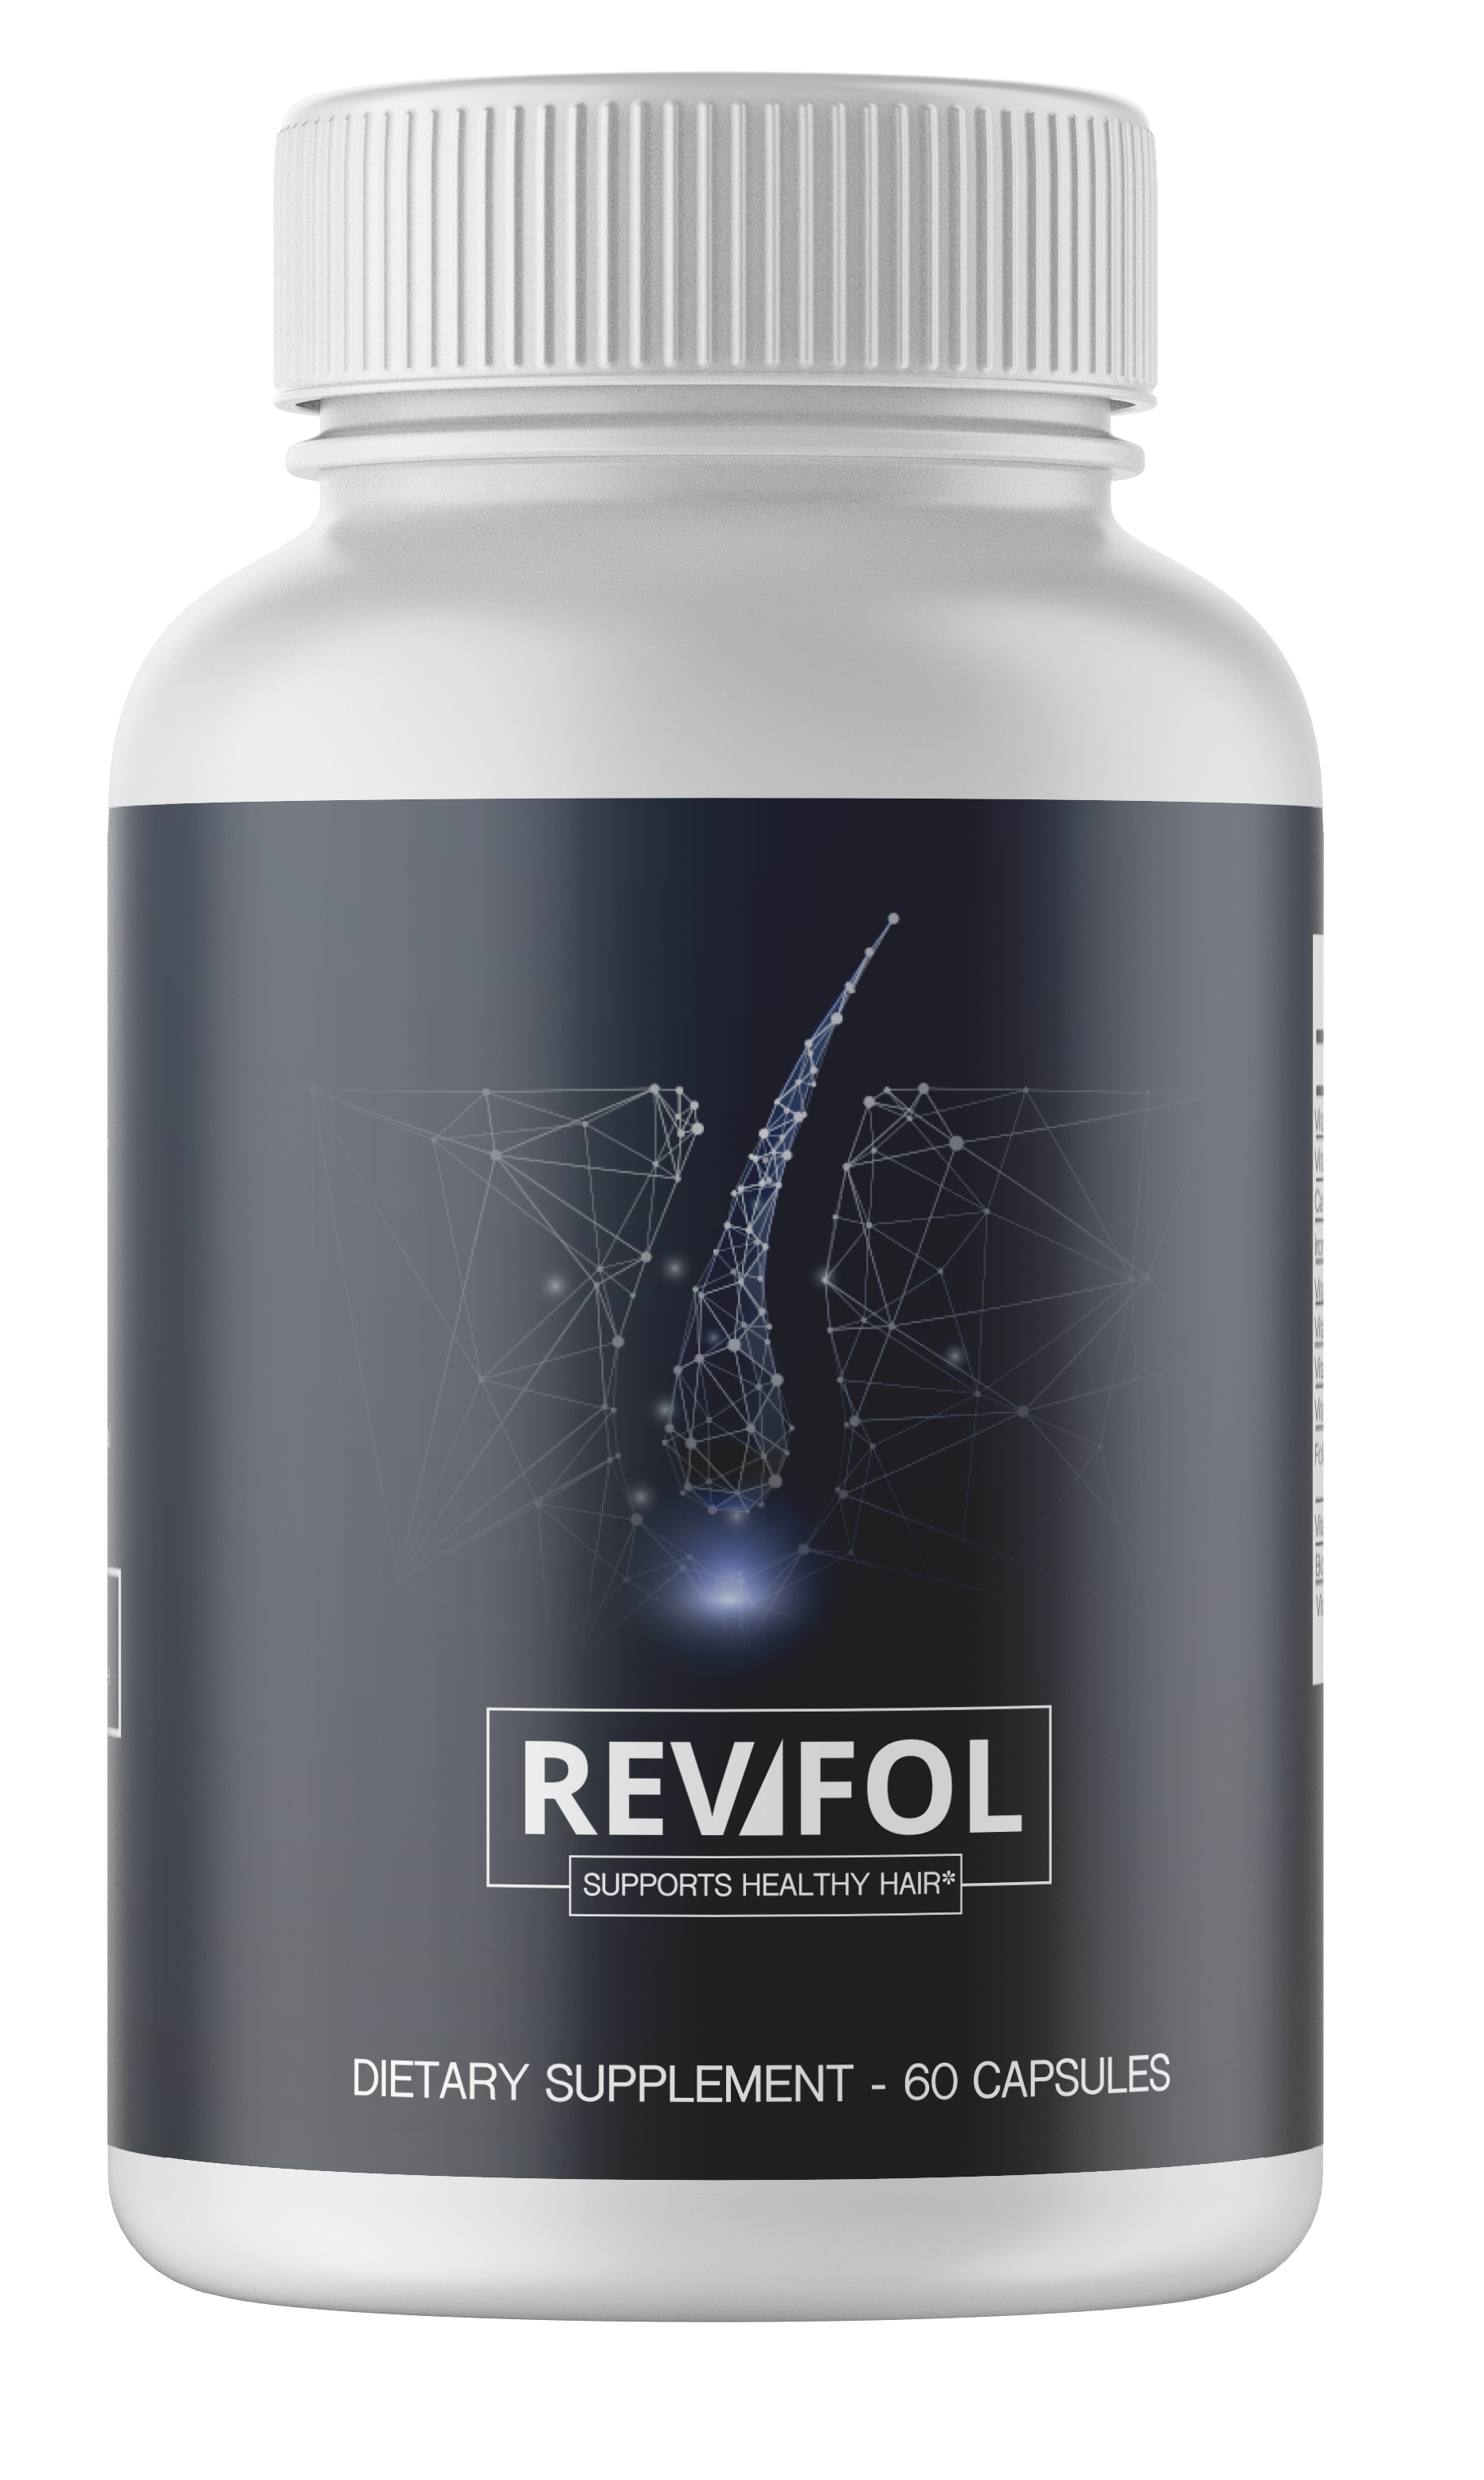 2 Bottles Revifol Hair Skin and Nails Supplement Hair Growth Vitamins 60 Caps